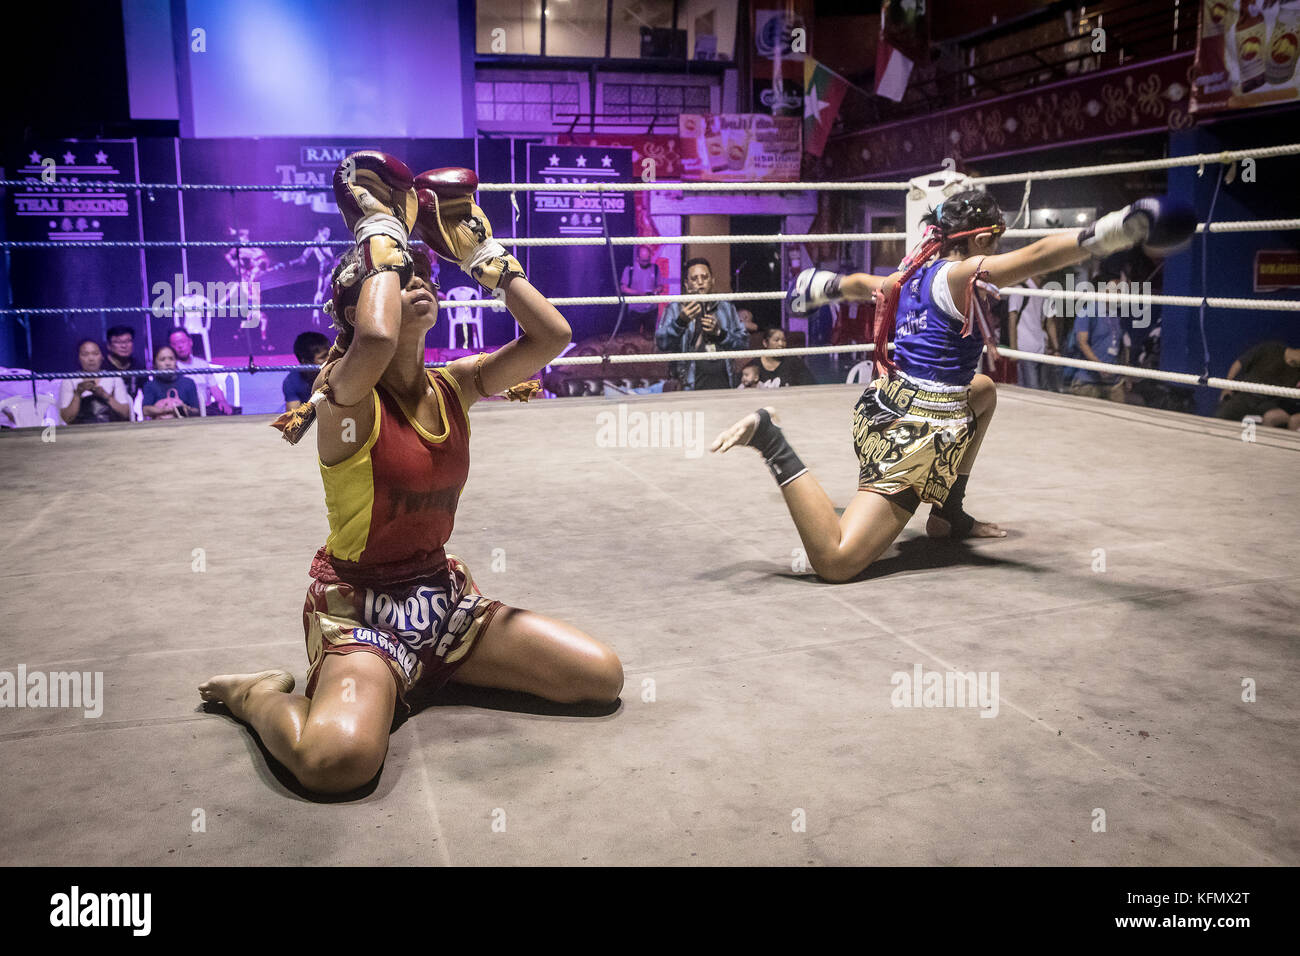 At left Sarania 11 years old. At right Nya, 11 years old. Muay Thai fighter going through pre-fight ritual, Thailand Stock Photo